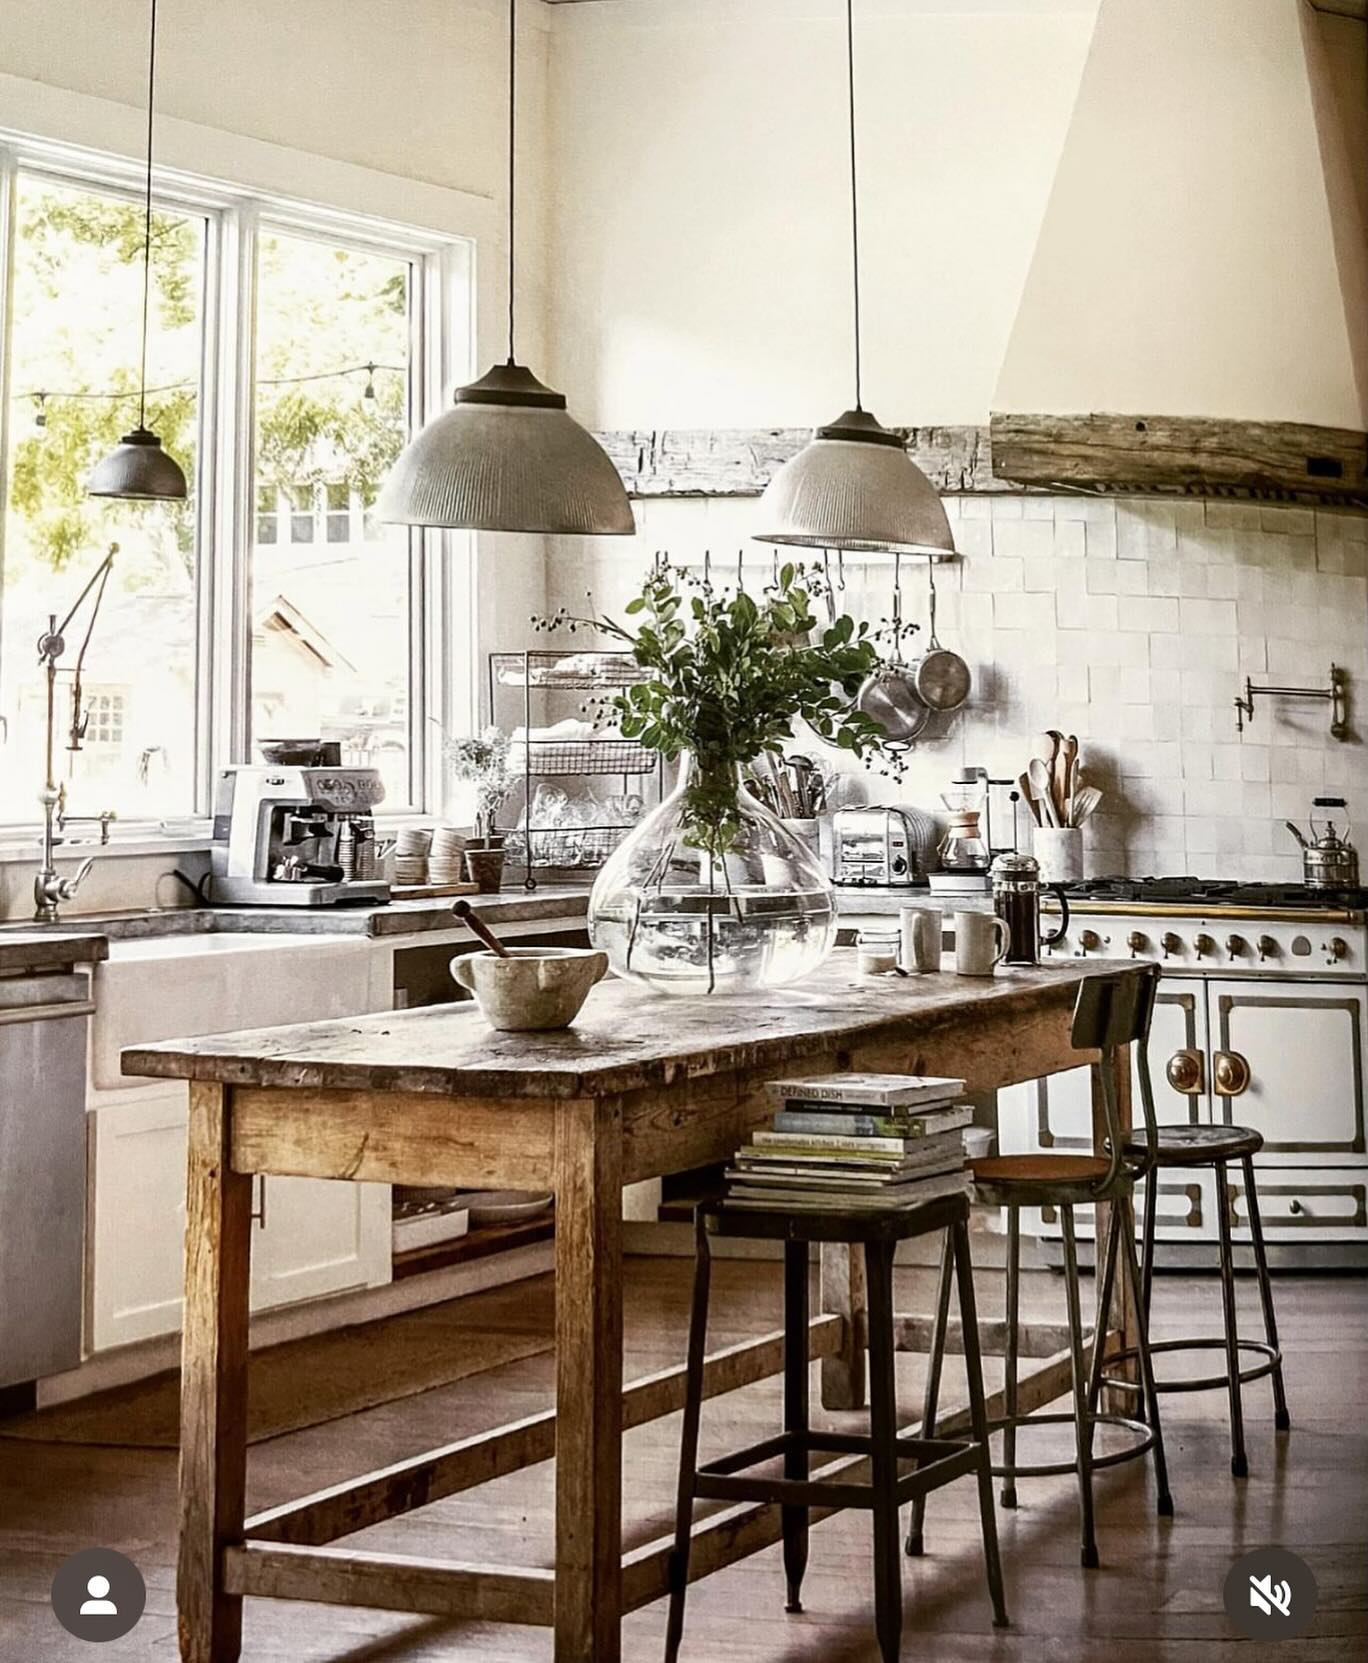 Chic Rustic Style Kitchen